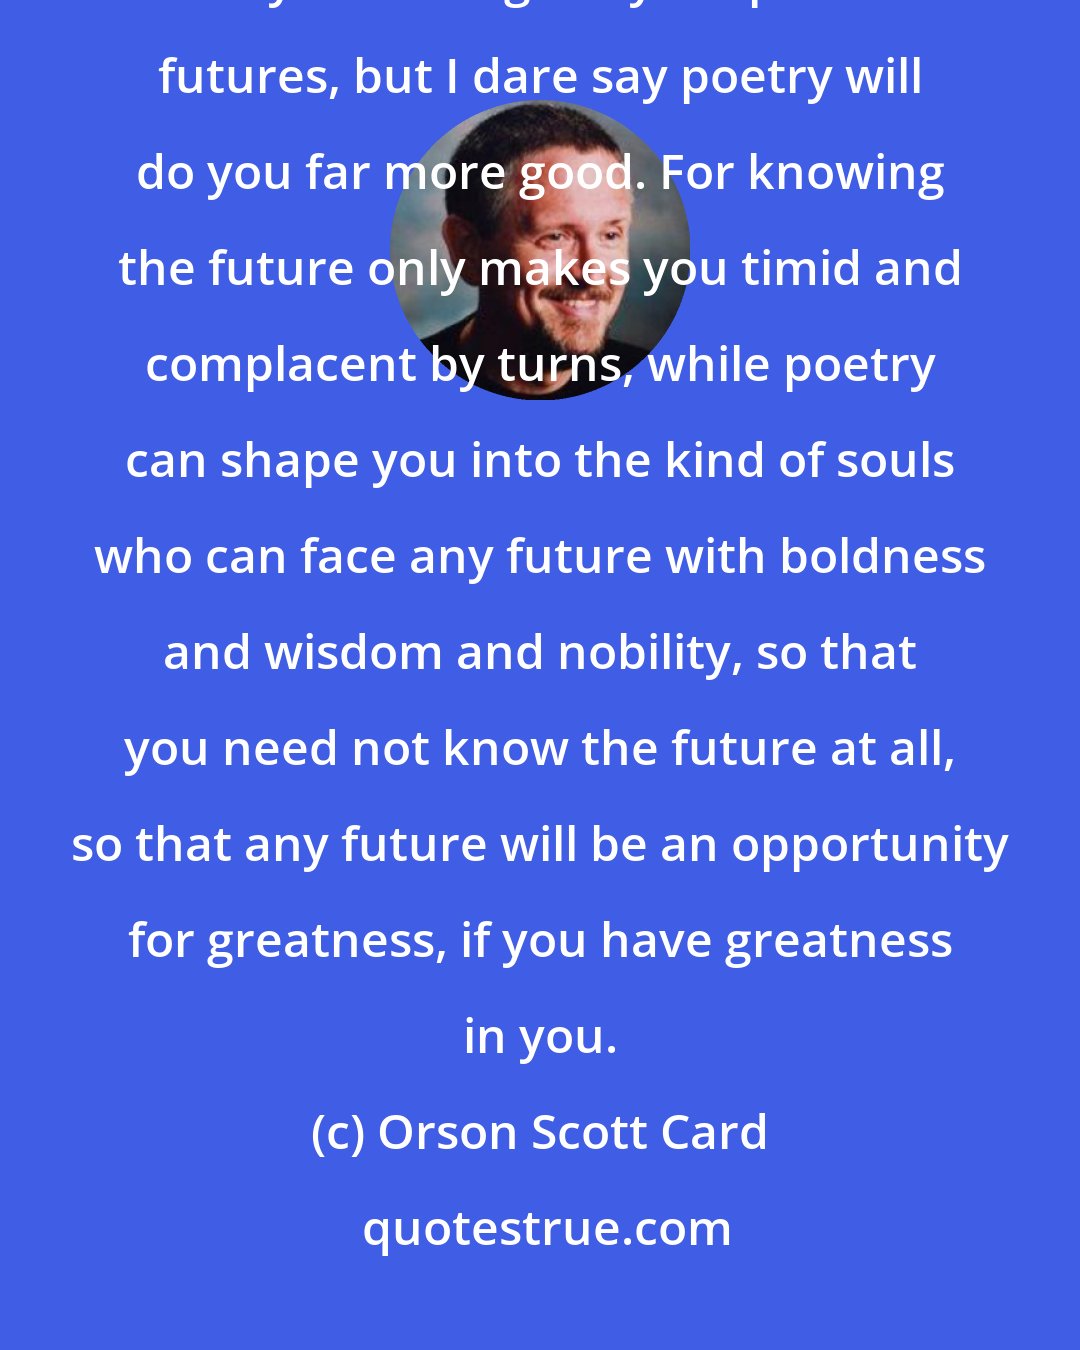 Orson Scott Card: Perhaps you don't desire poetry as much as you would like to have my torchy knowledge of your possible futures, but I dare say poetry will do you far more good. For knowing the future only makes you timid and complacent by turns, while poetry can shape you into the kind of souls who can face any future with boldness and wisdom and nobility, so that you need not know the future at all, so that any future will be an opportunity for greatness, if you have greatness in you.